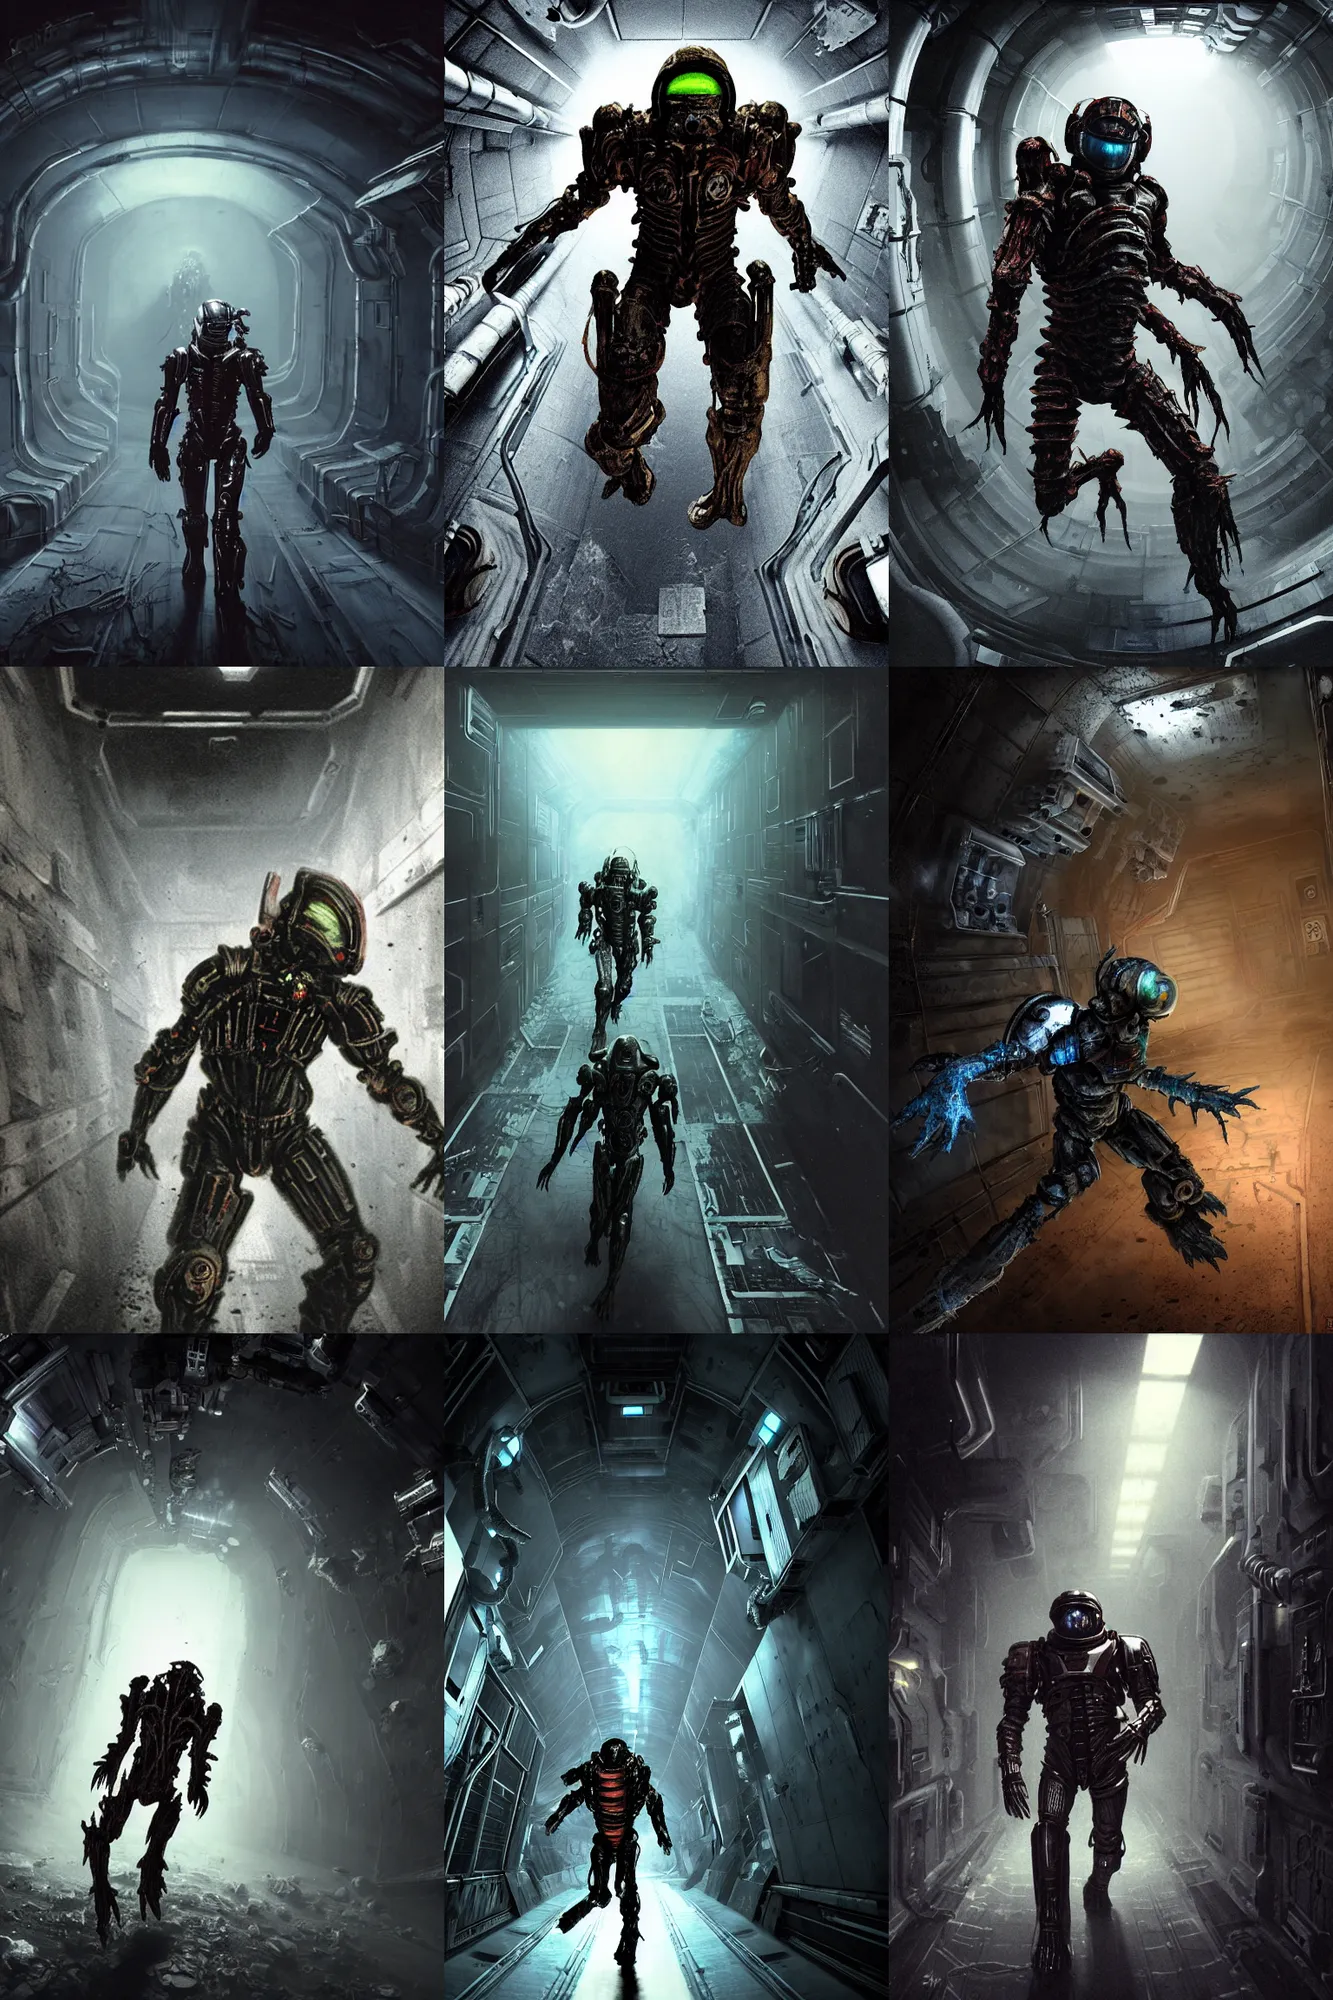 Prompt: horror movie scene of an individual in futuristic armor being chased down a hallway, running through a deep space mining space station, rusty metal walls, broken pipes, side angle, dark colors, muted colors, tense atmosphere, mist floats in the air, amazing value control, dead space, moody colors, dramatic lighting, ussg ishimura, frank frazetta, hr giger interior